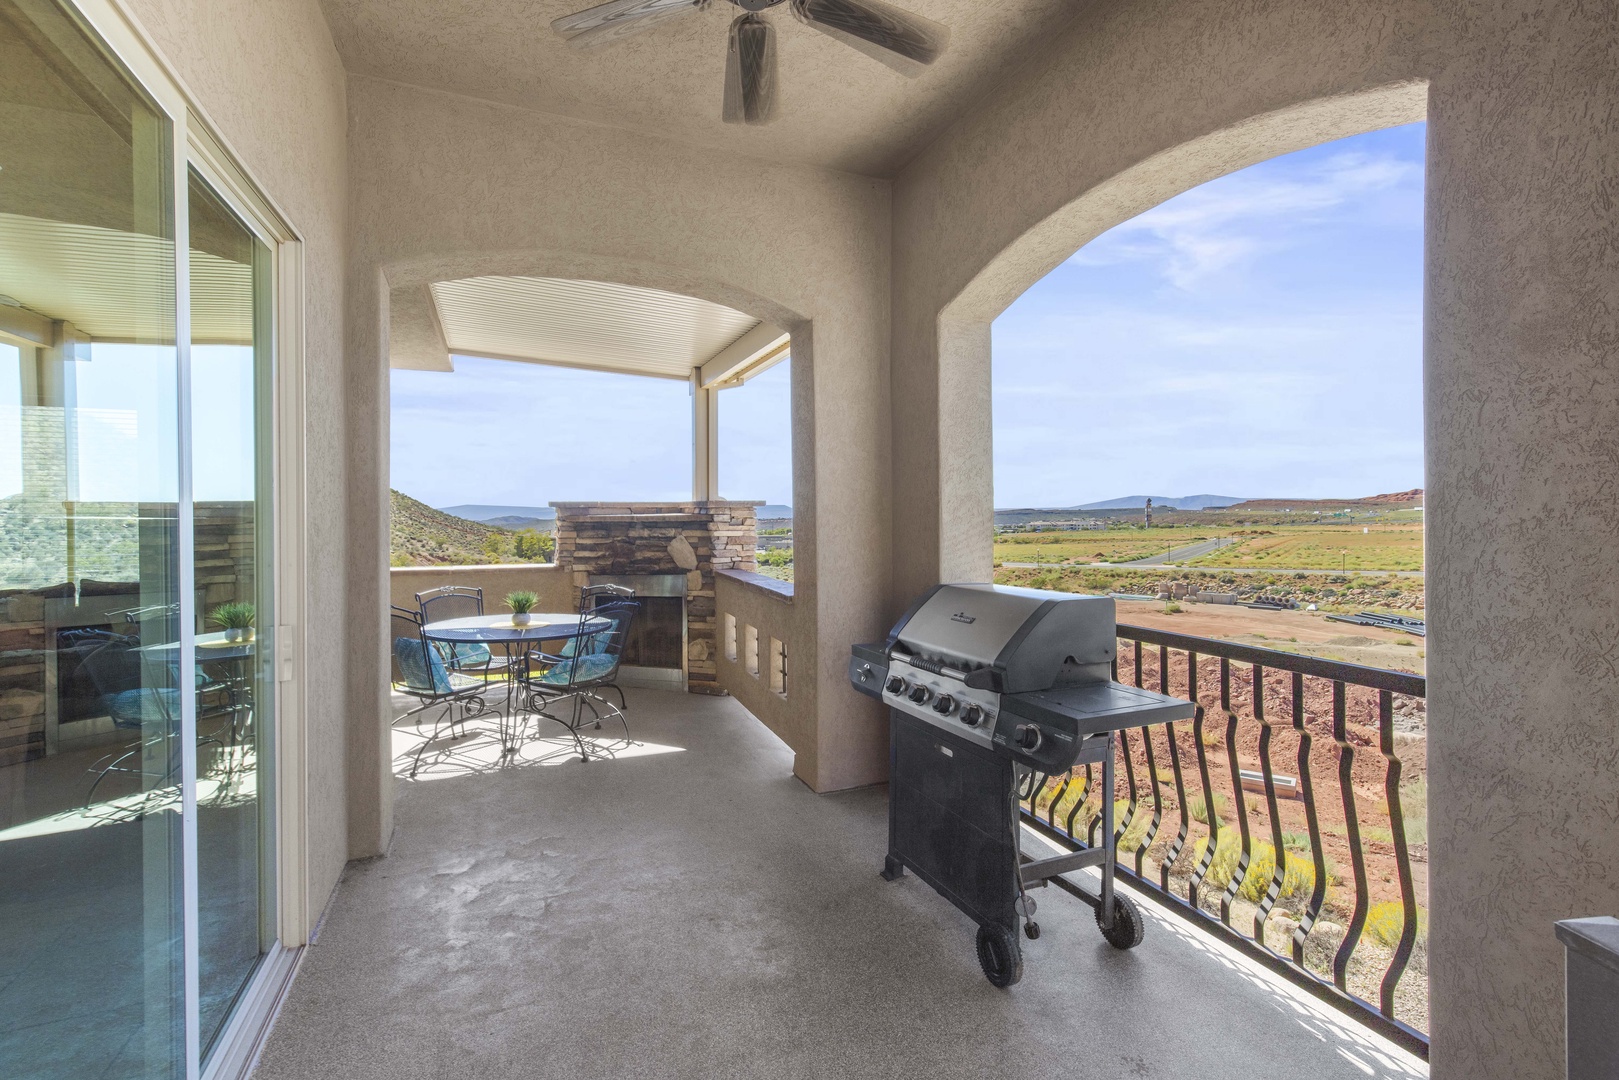 Relax on the balcony with gorgeous desert views while you grill up a feast!